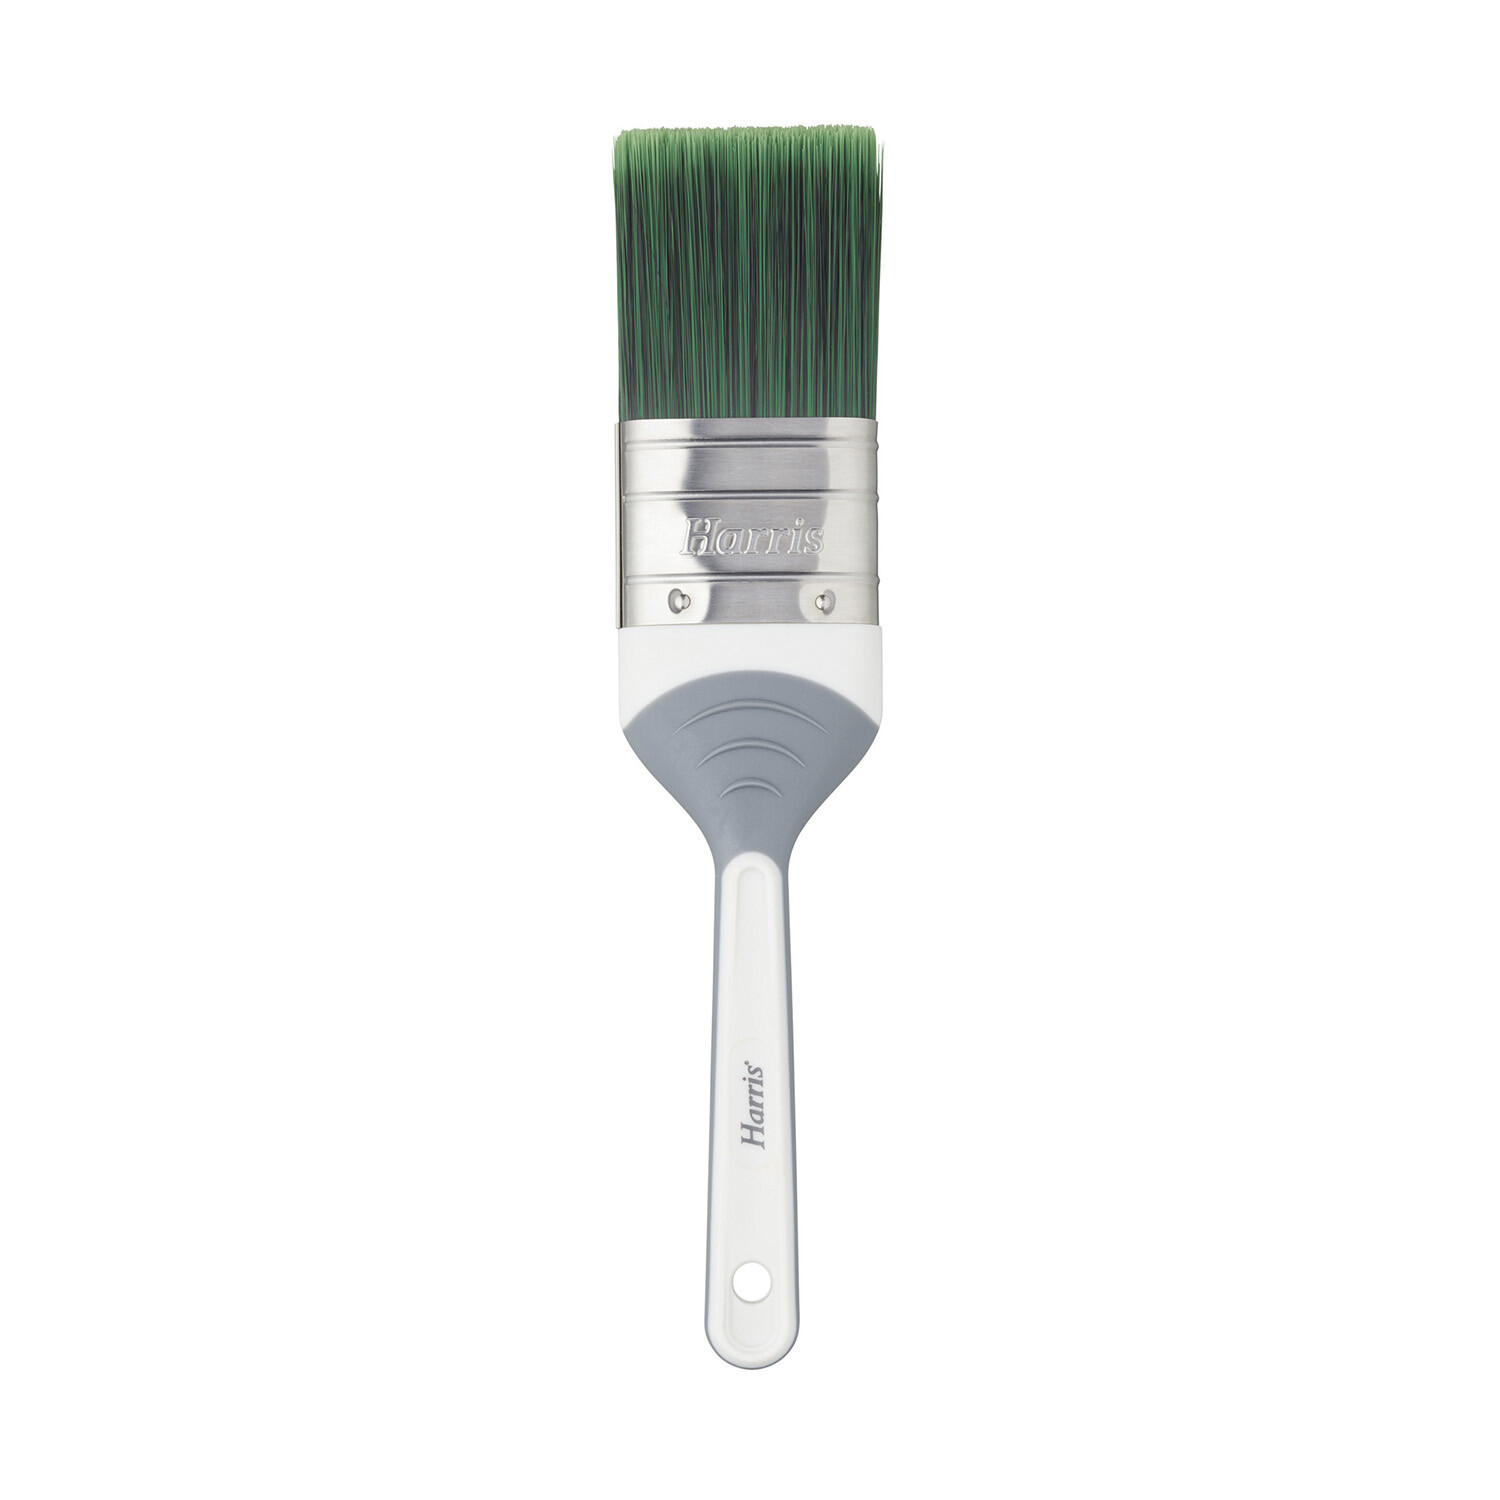 Harris Seriously Good Shed & Fence Paint Brush - 2in Image 2